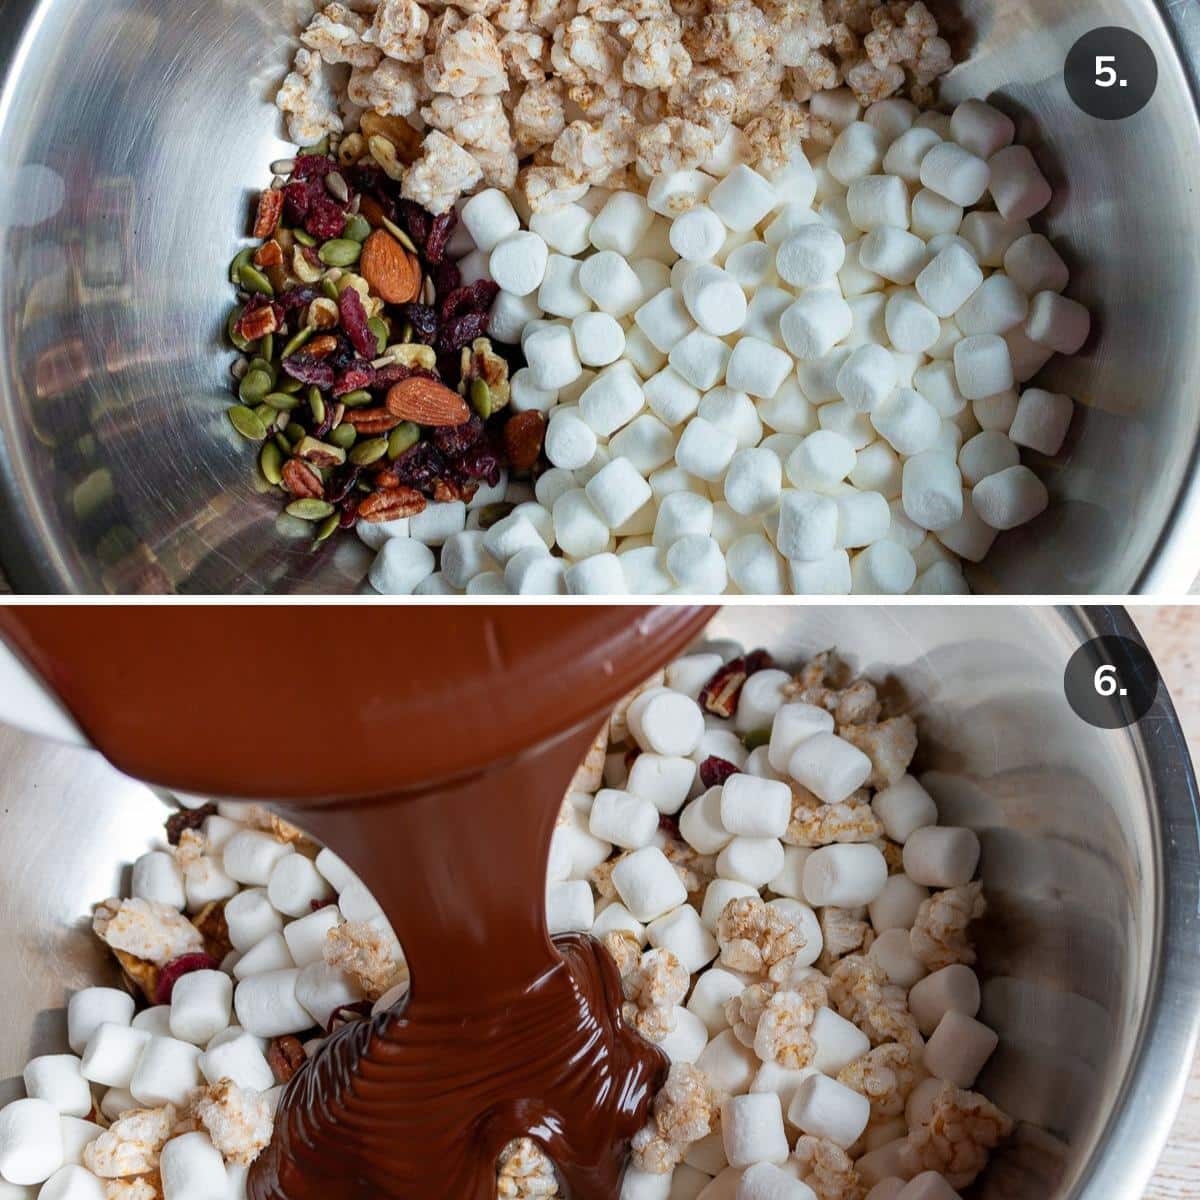 Gluten free dry rice crackers, marshmallows and trail mix getting melted dark chocolate drizzled on top.